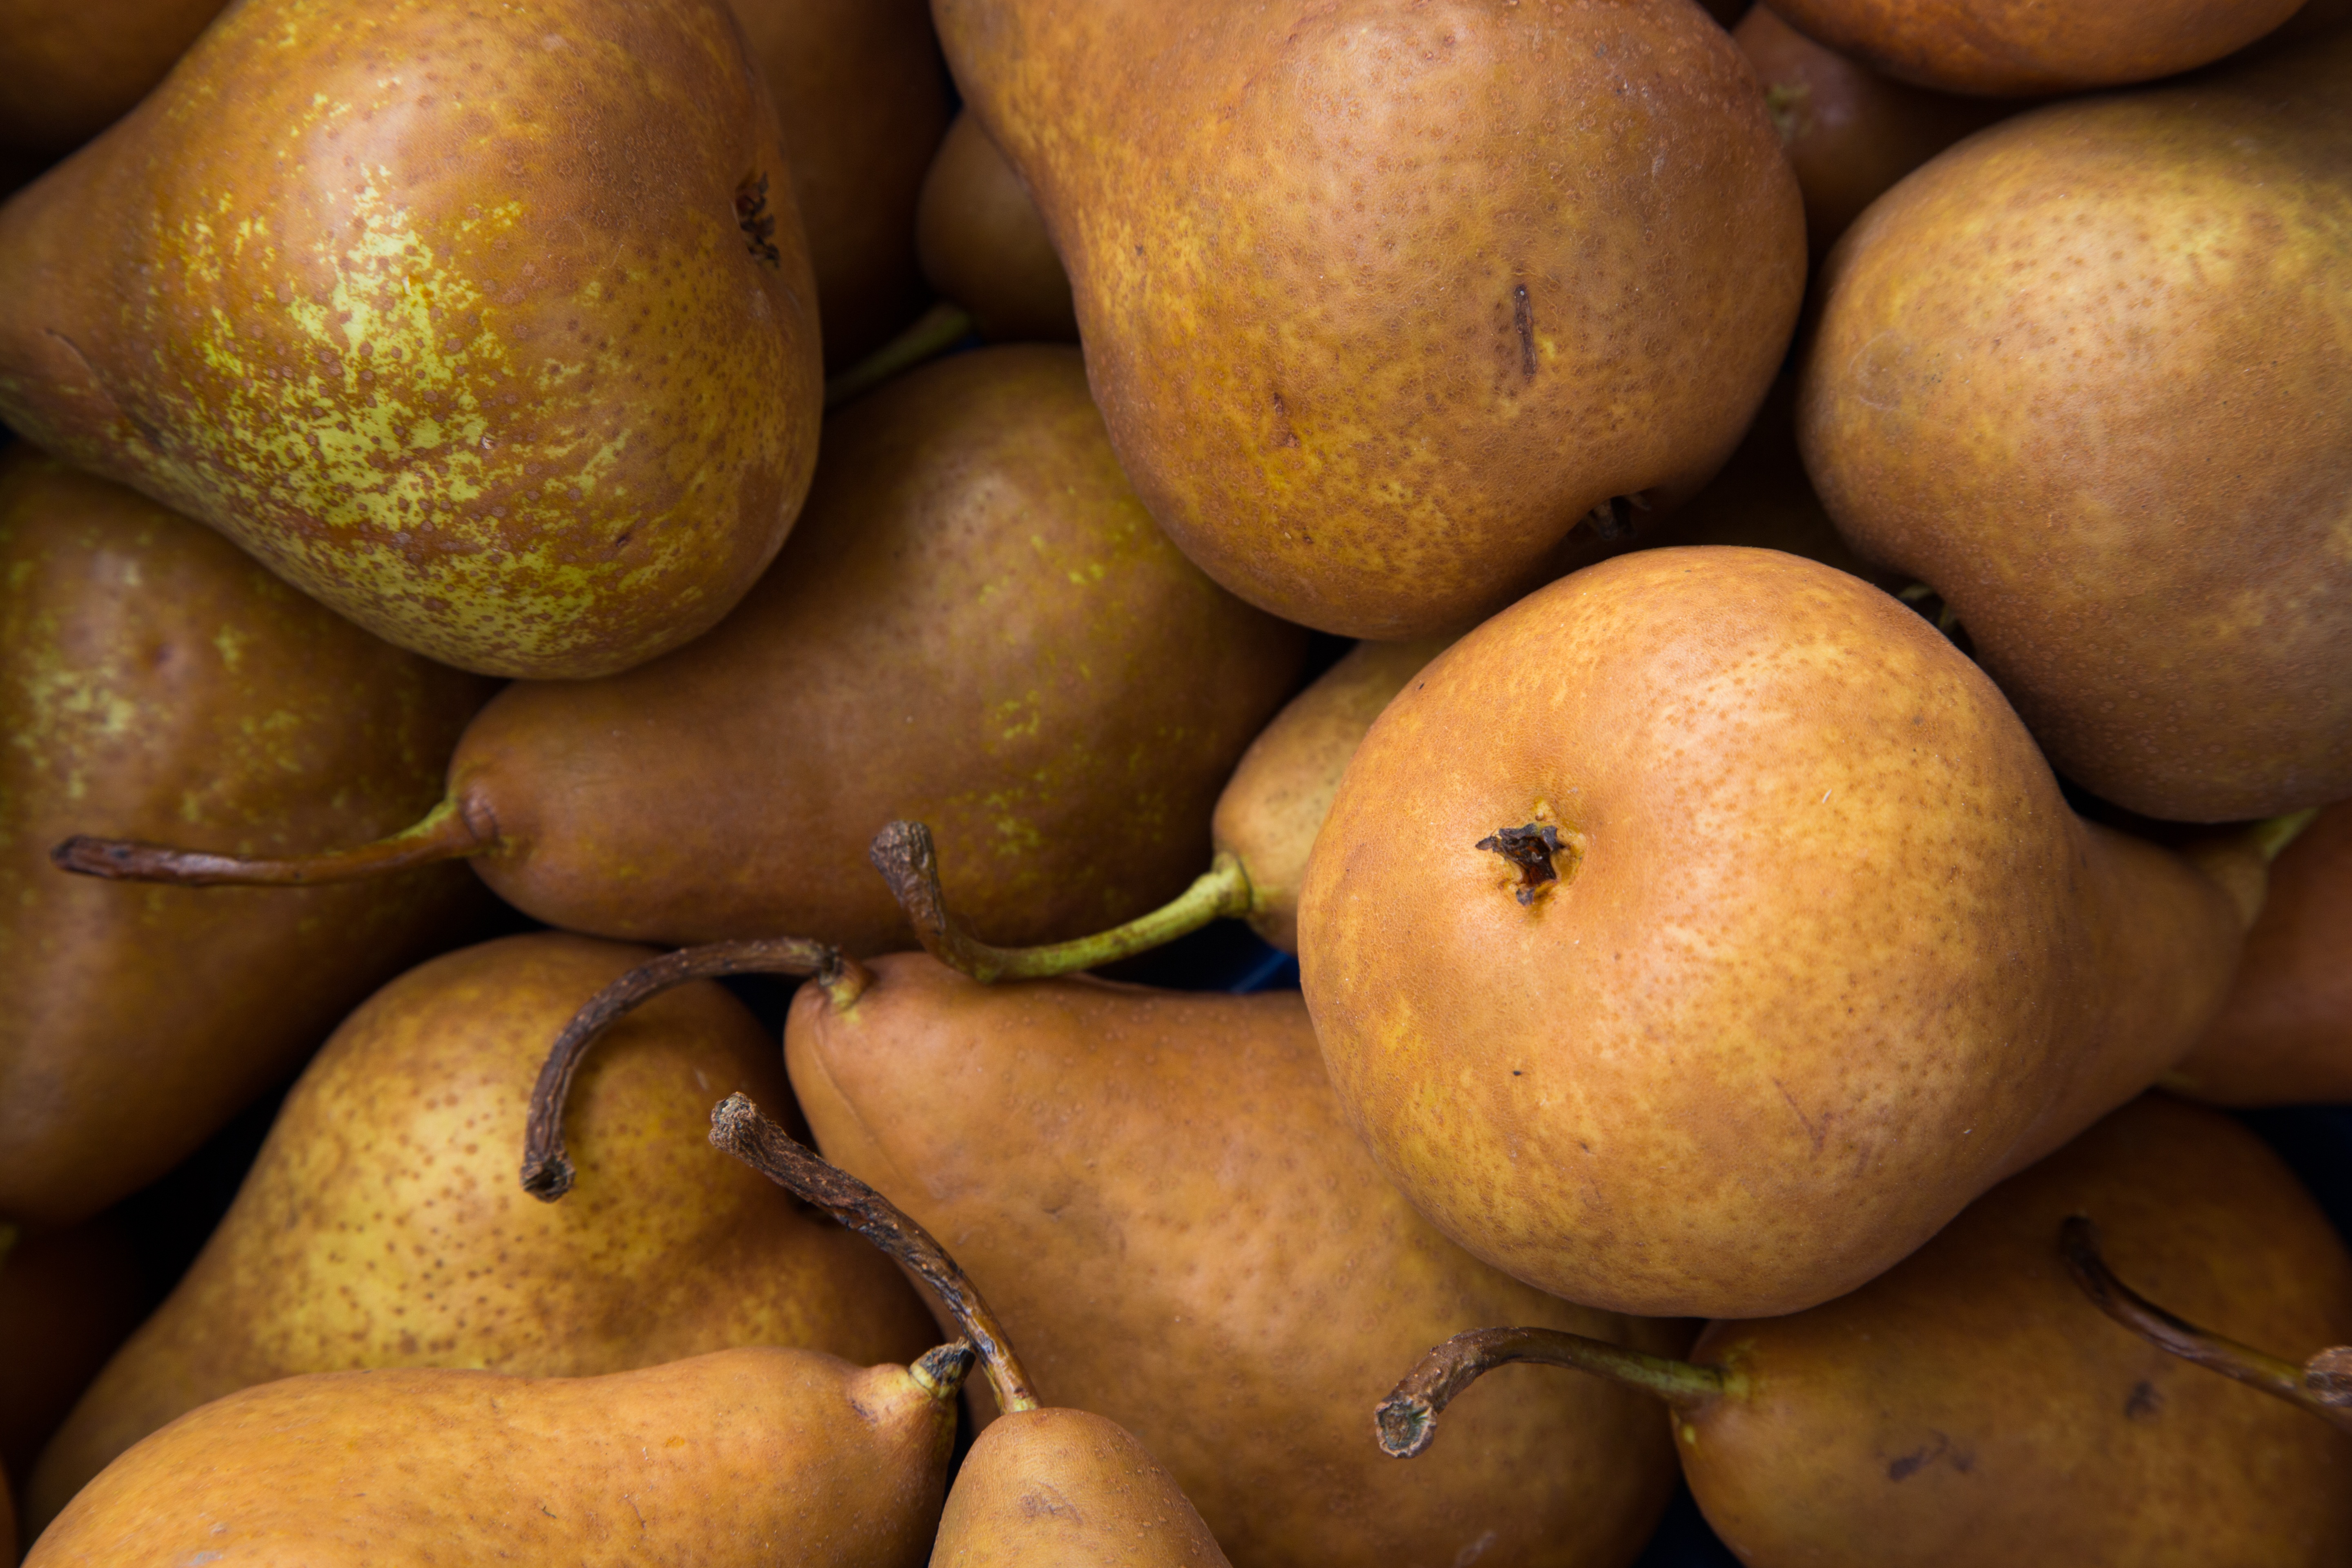 Popular Pears Image for Phone